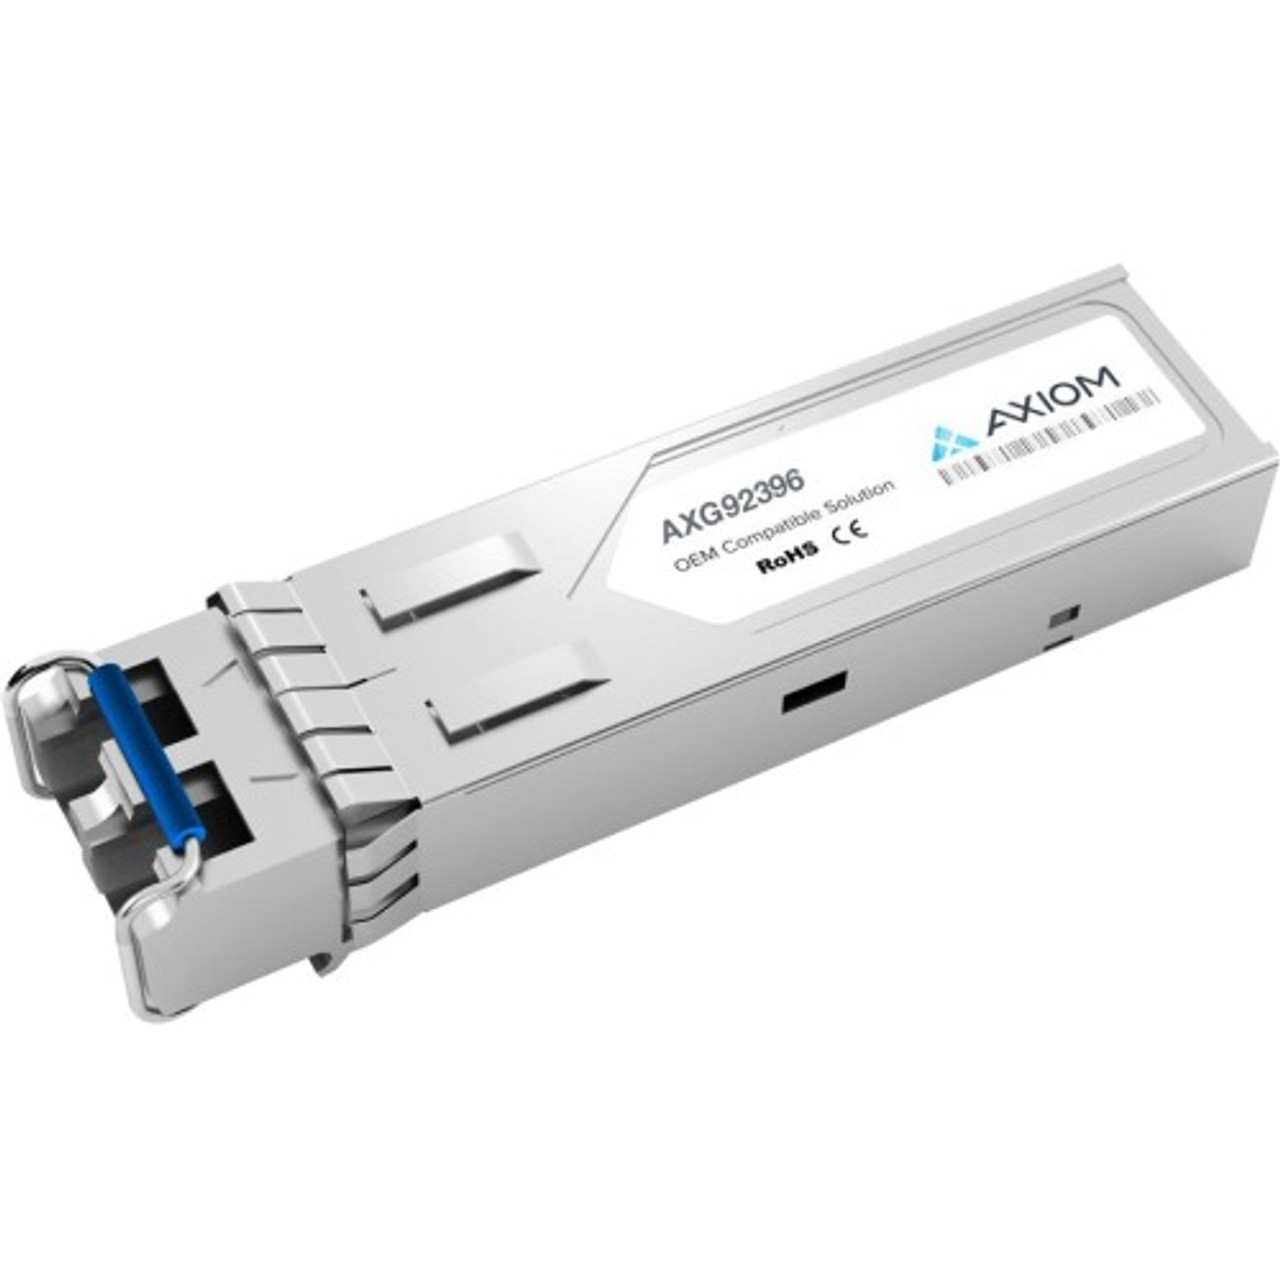 AXG92396 Axiom 1Gbps 1000Base-LX Single-mode Fiber 10km 1310nm LC Connector SFP Transceiver Module - Taa Compliant for Allied Telesis AT-SPLX10